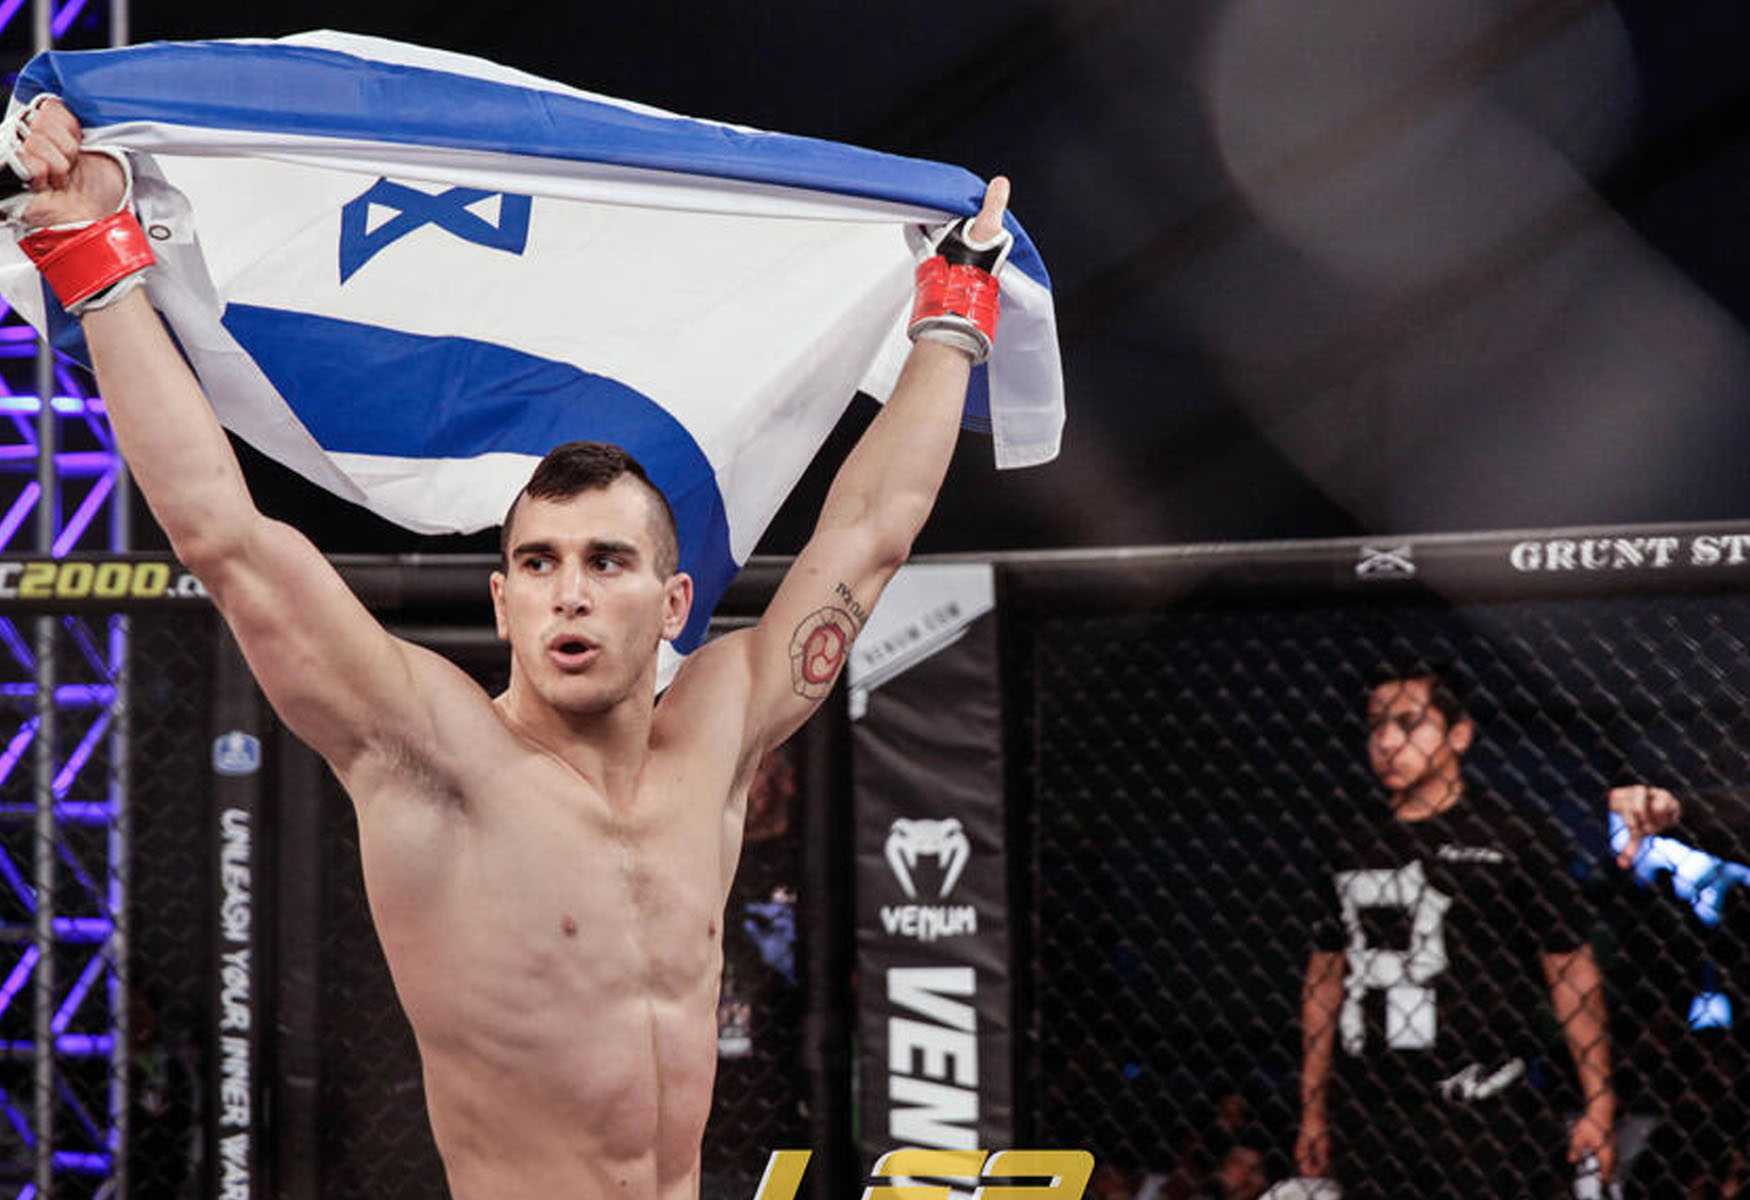 israeli-missile-marked-with-kanye-wests-name-mma-fighter-takes-credit